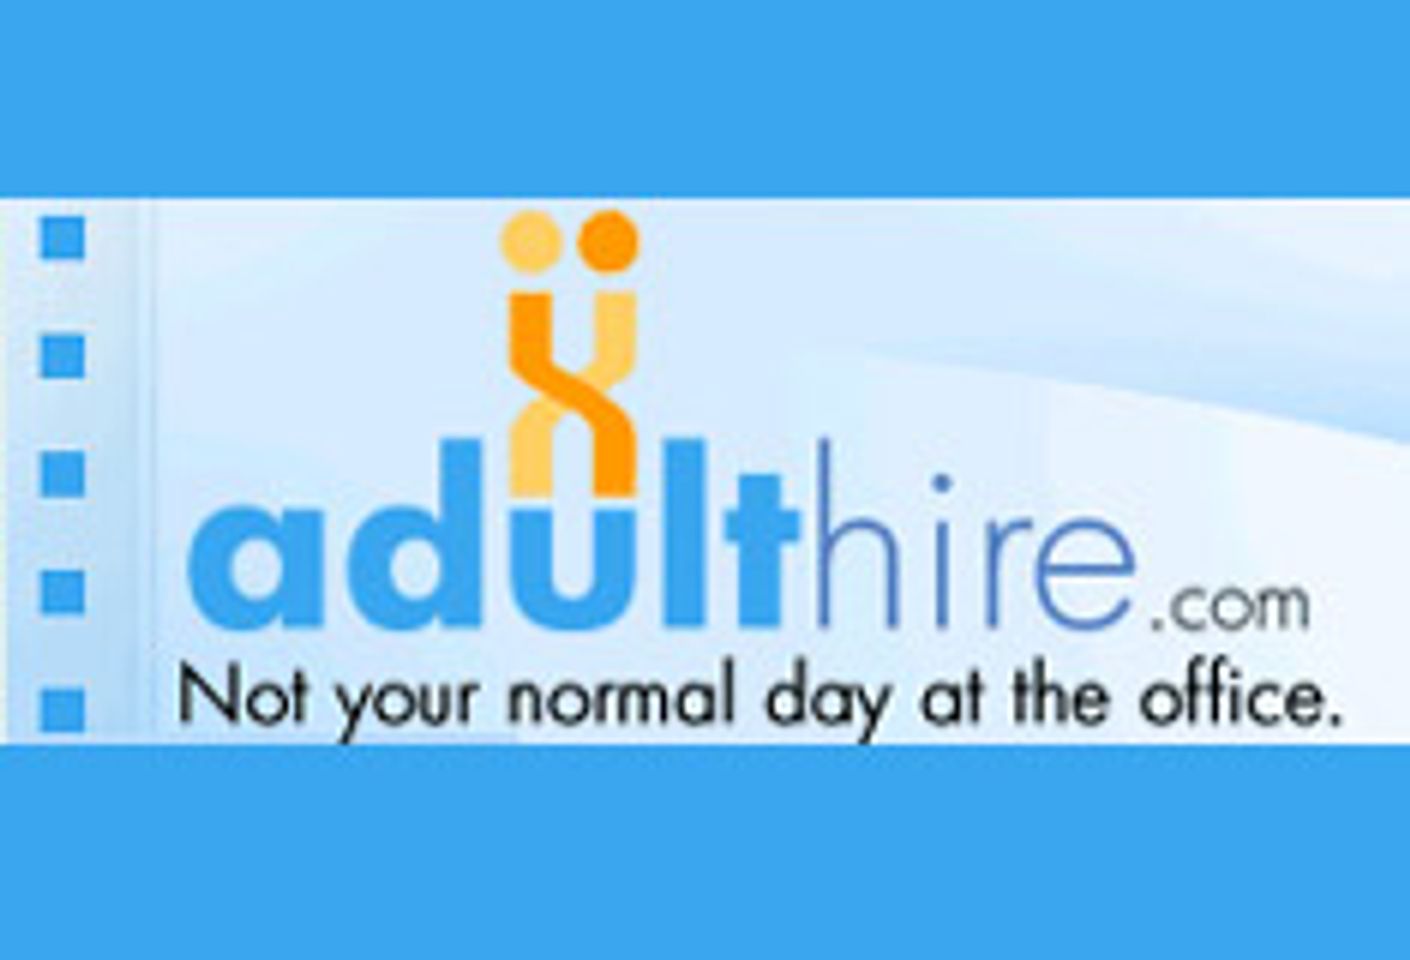 AdultHire.com Changes Pricing Plans